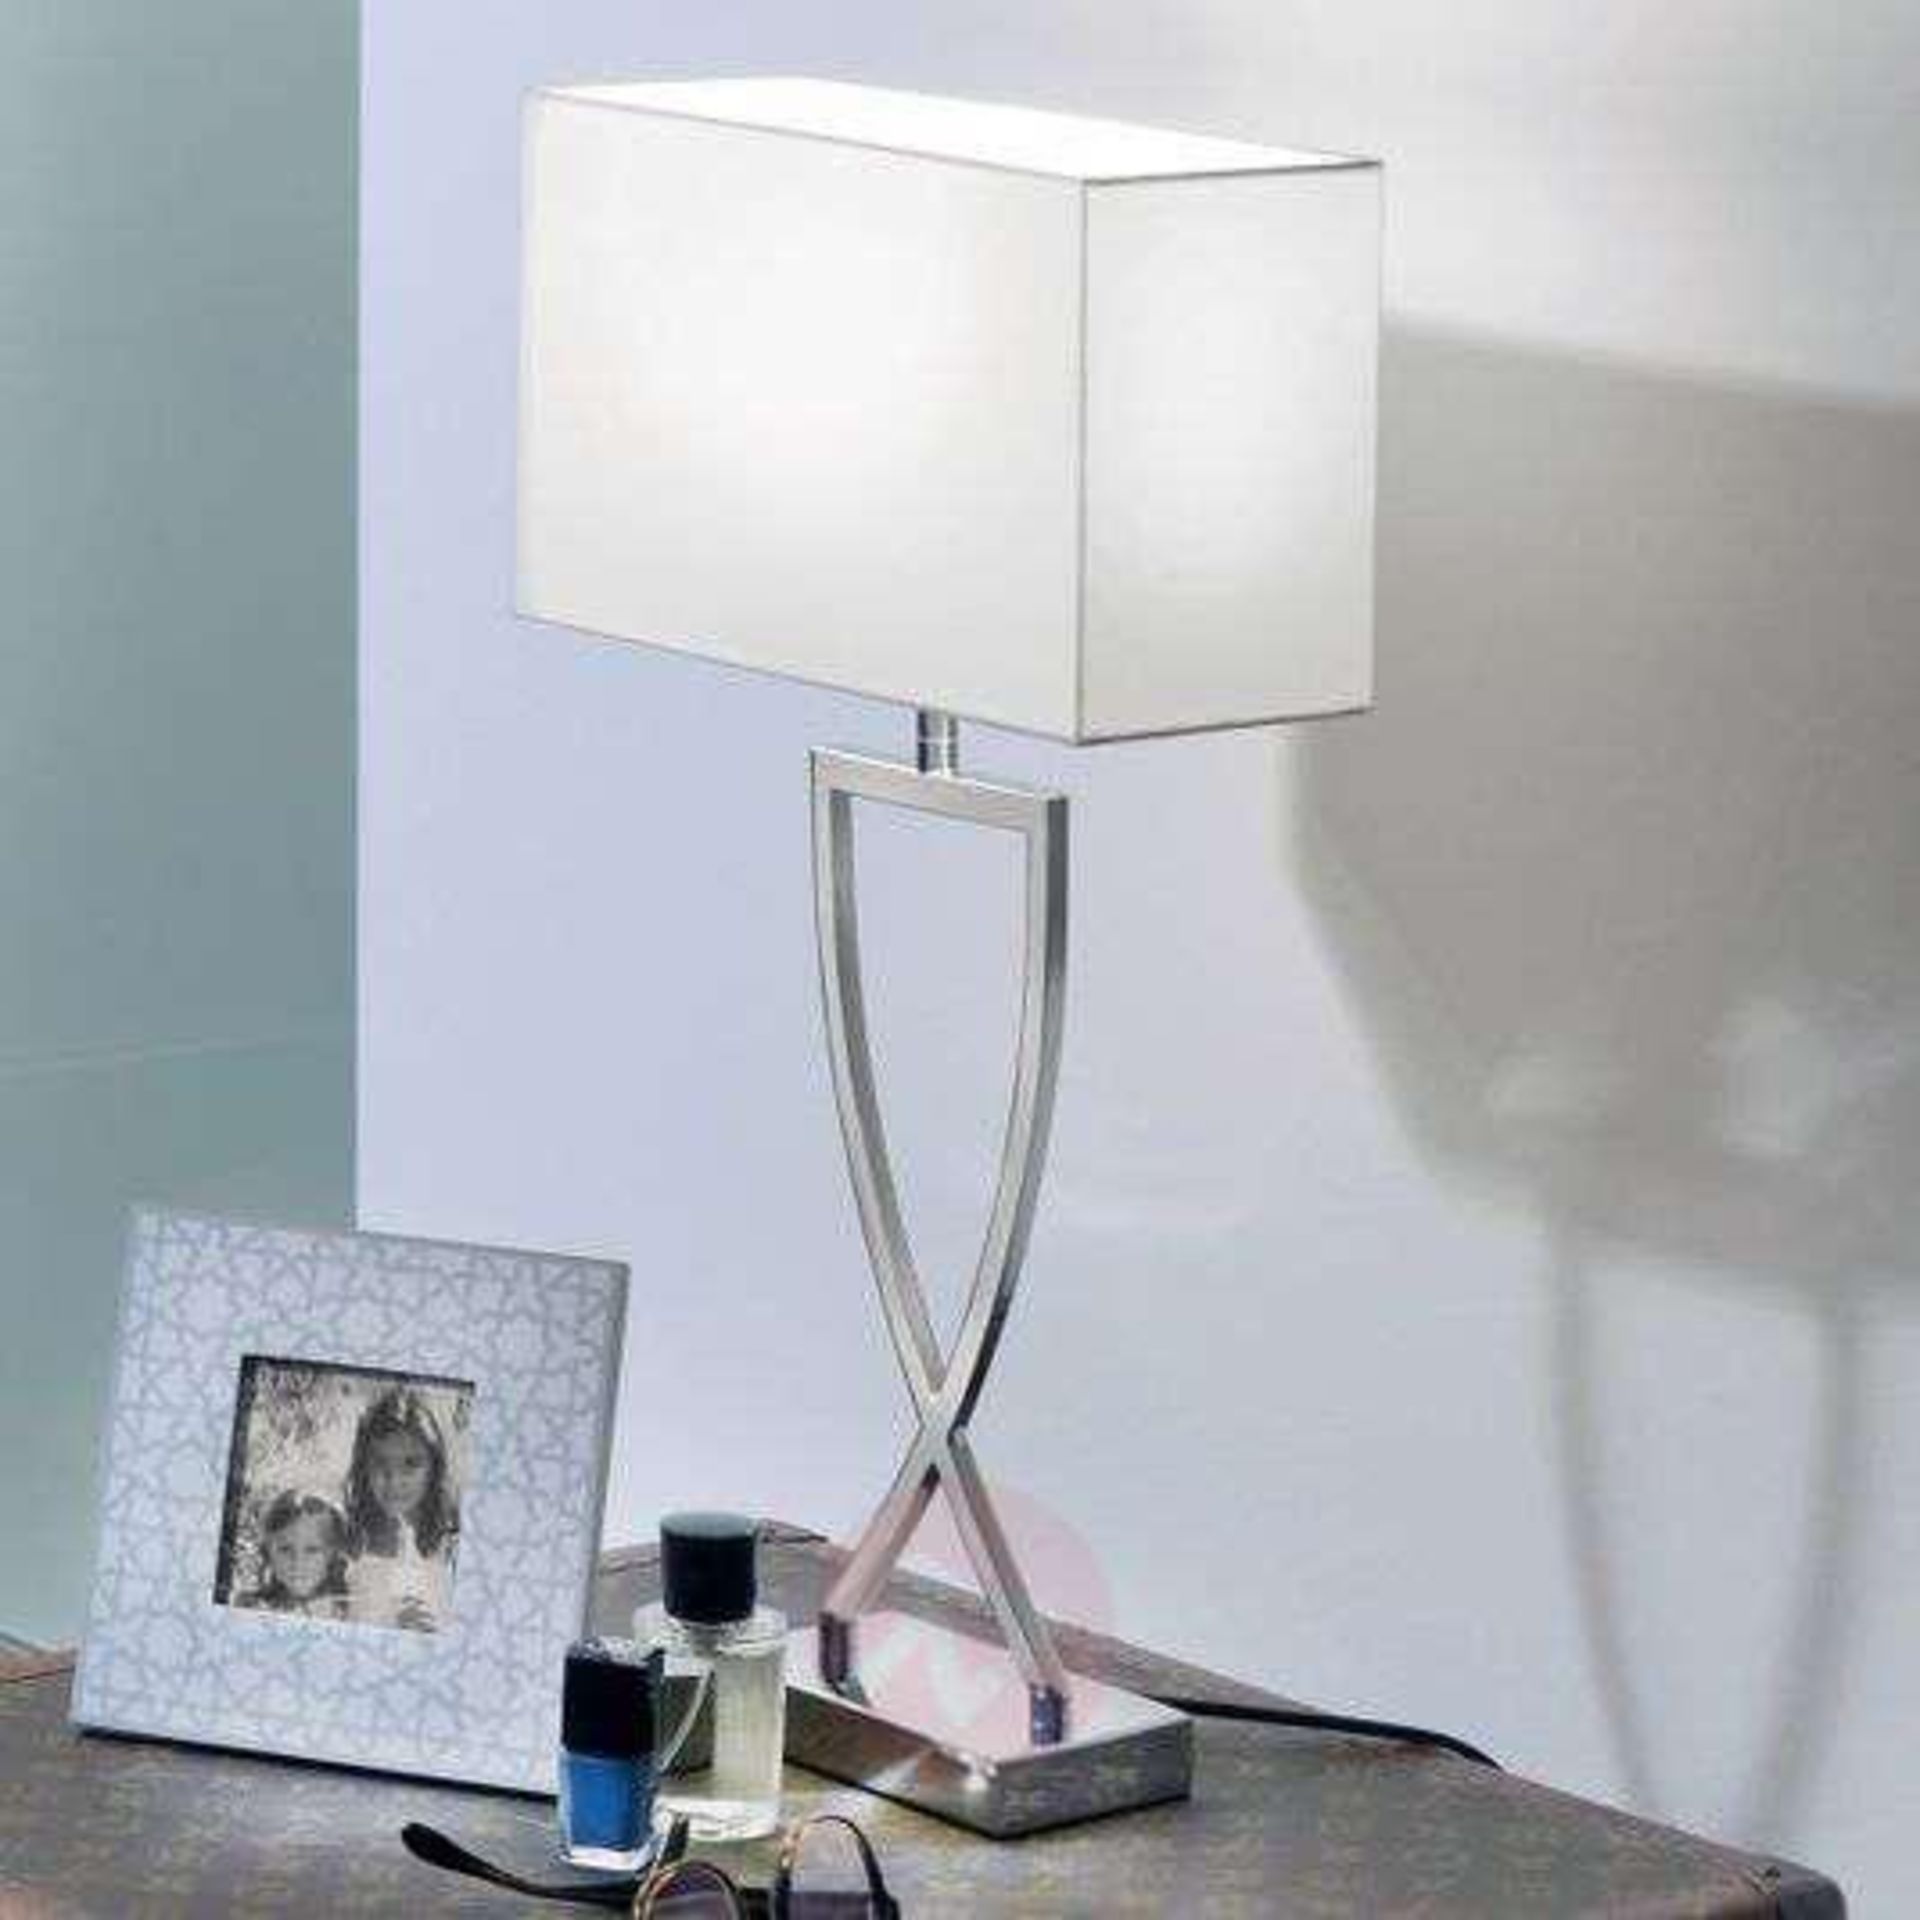 Villeroy and Boch Classic table lamp Toulouse with white fabric lampshade 40 x 16 x 68.5cm - Image 2 of 2